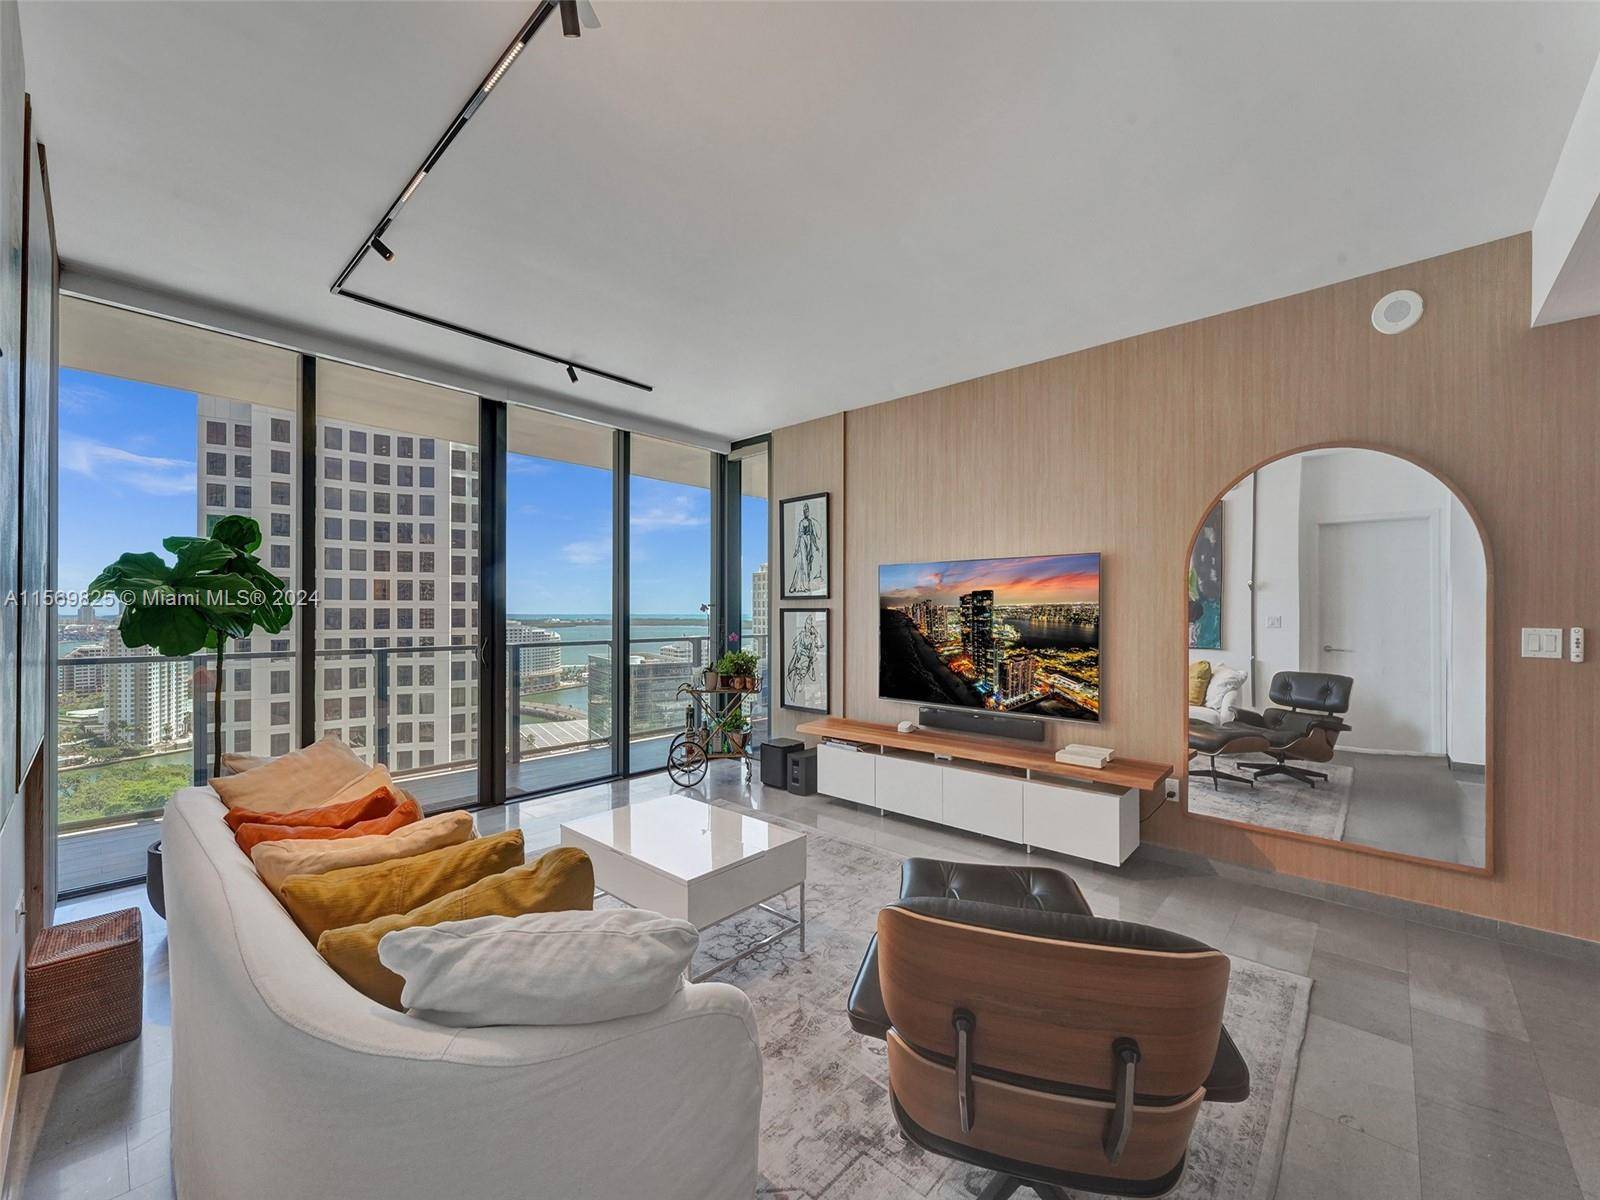 Enjoy the largest 3 bedroom line in the building with this 3 bedroom, 3 bathroom Den condo, featuring an expansive terrace and over 250K in upgrades.